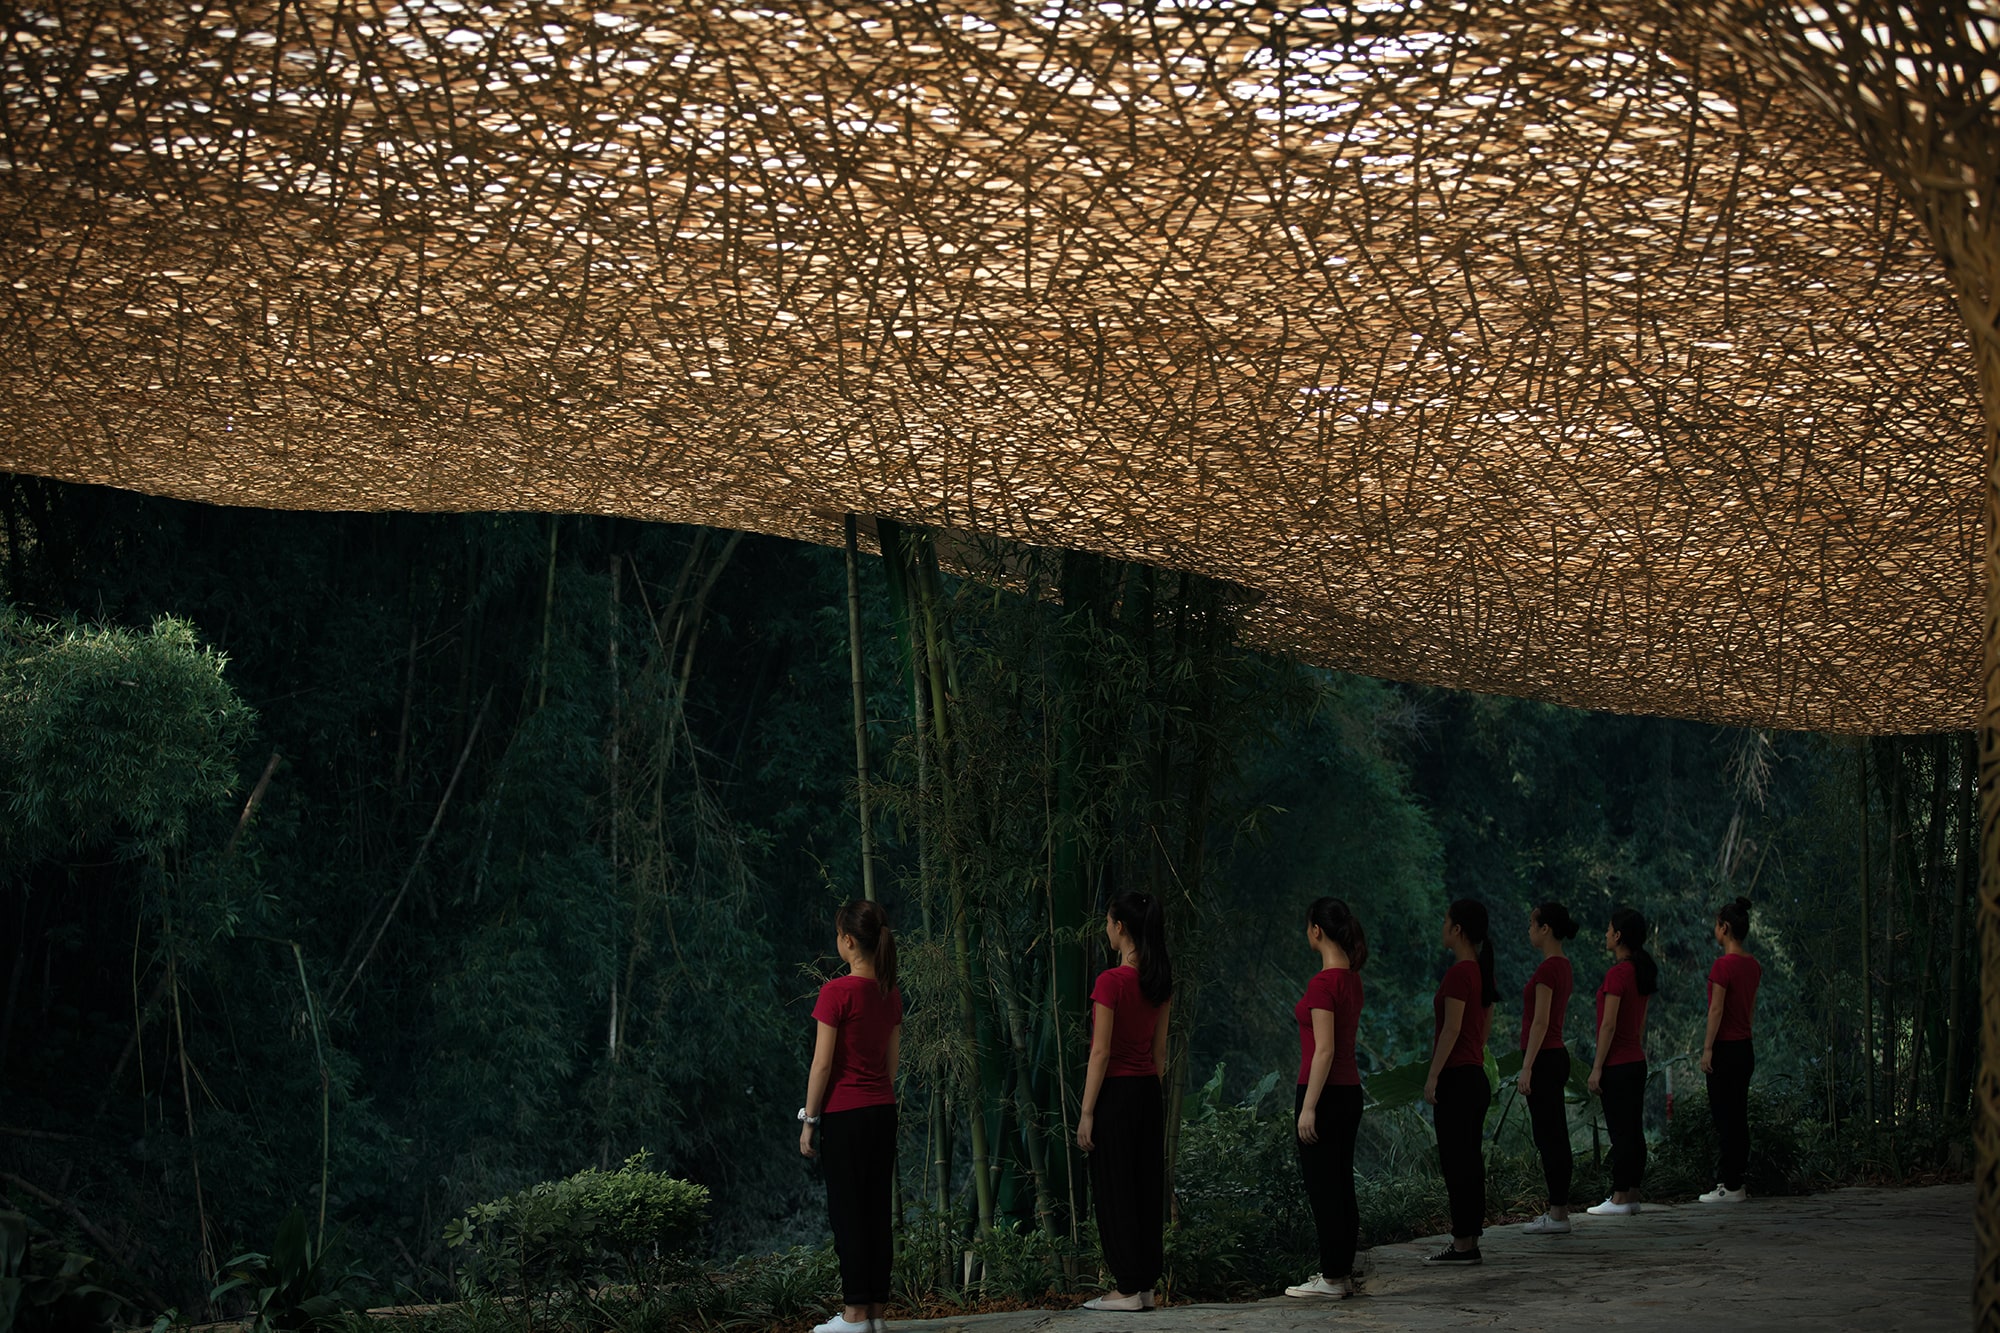 Bamboo, Bamboo, Canopy and Pavilions